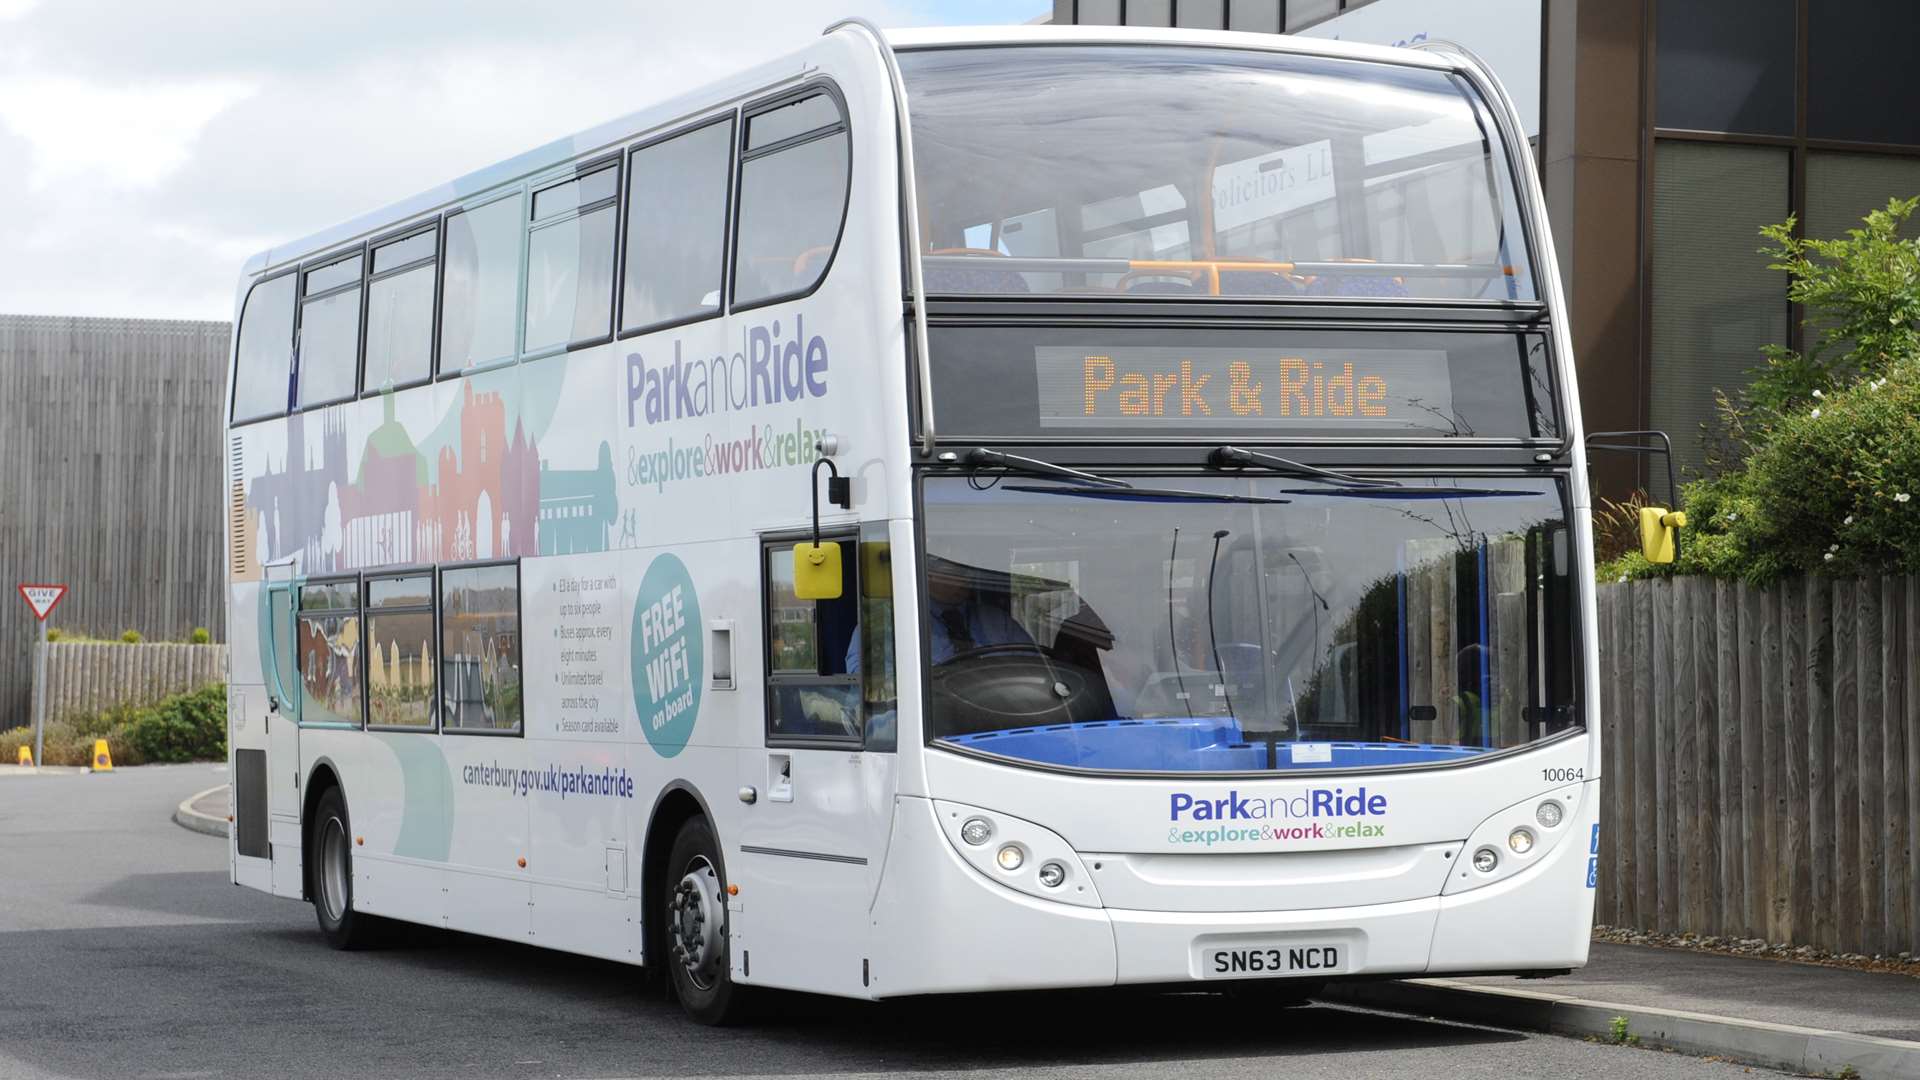 Park and ride is used in Canterbury and Maidstone